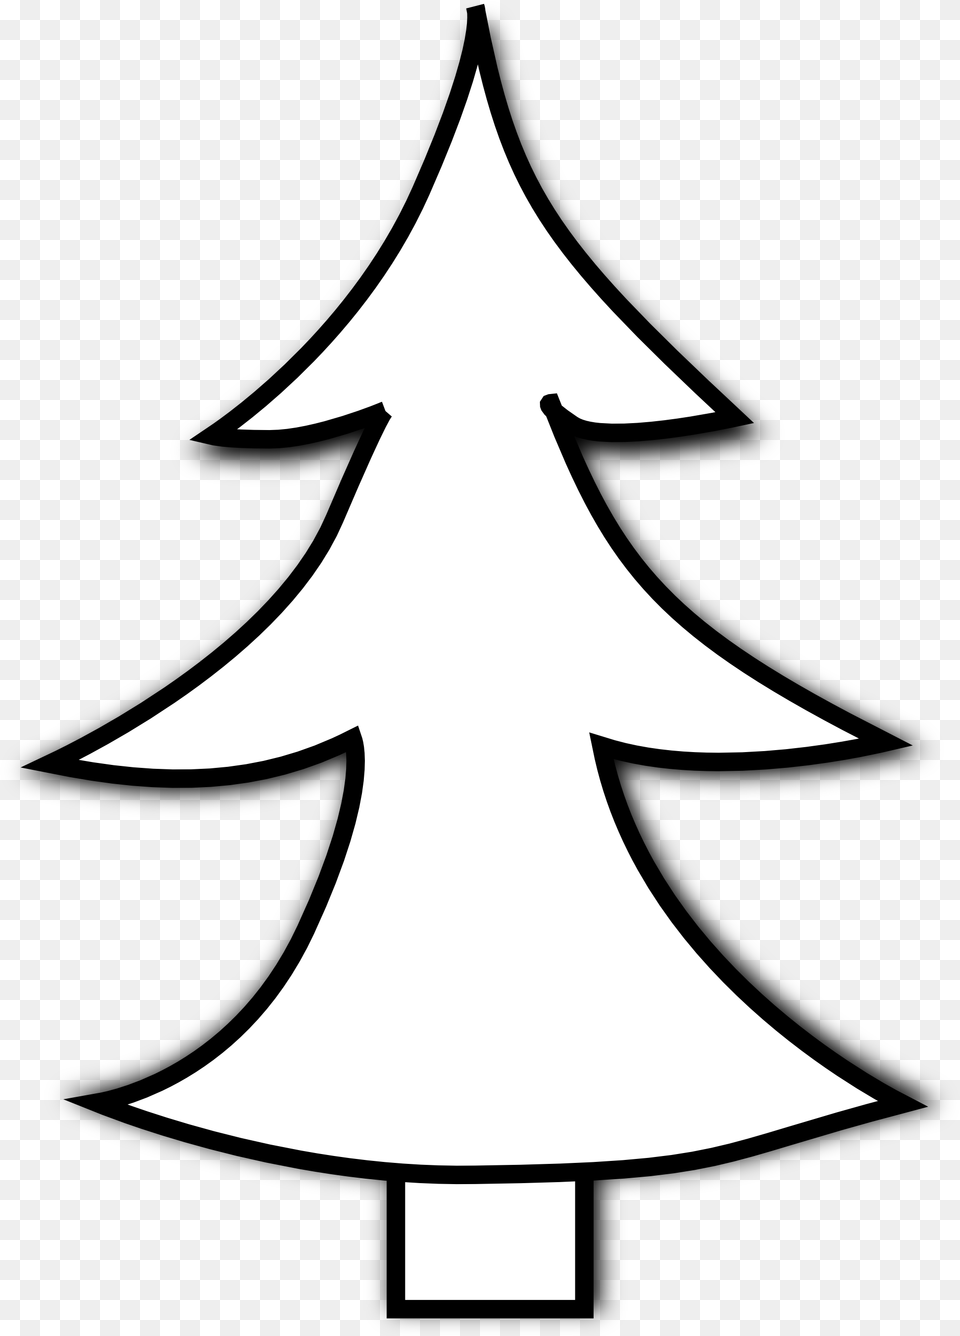 Best Christmas Tree Clipart Black And White Christmas Clip Art Black And White, Stencil, Silhouette, Animal, Fish Png Image